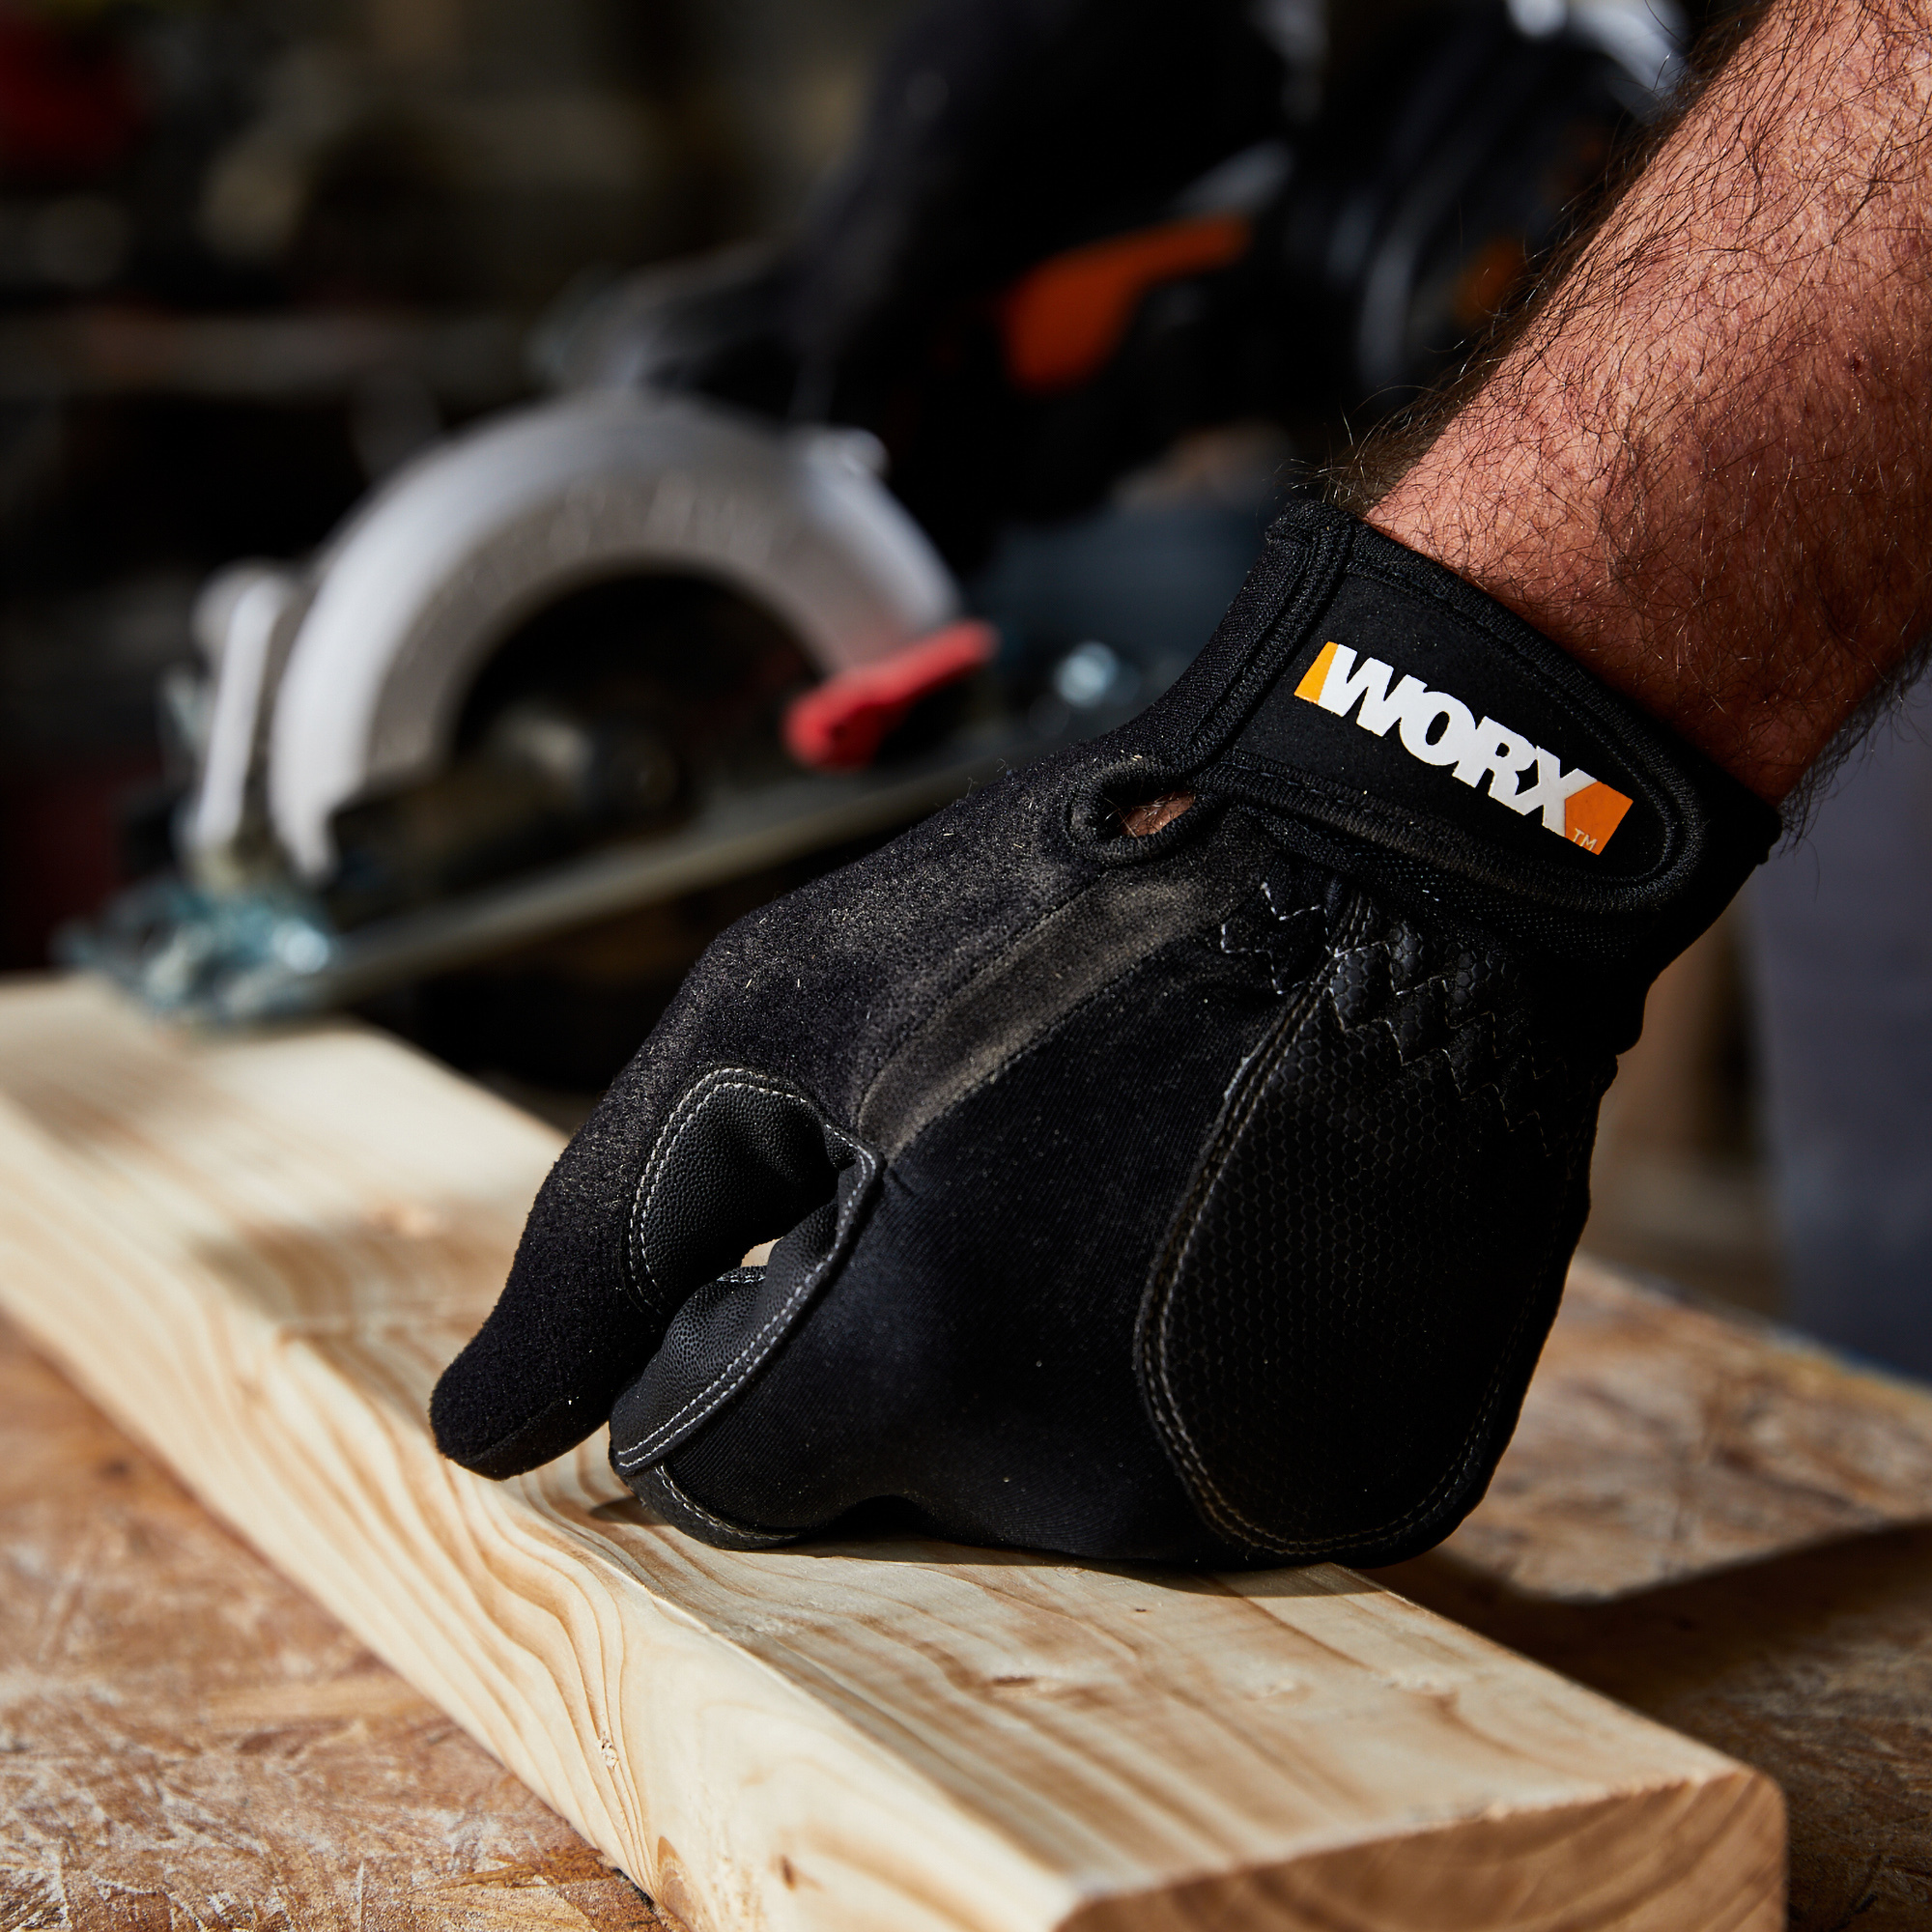 WORX Universal Fit Work Gloves – Performance, featuring 3D compression-fit technology, are durable, breathable and water repellant.